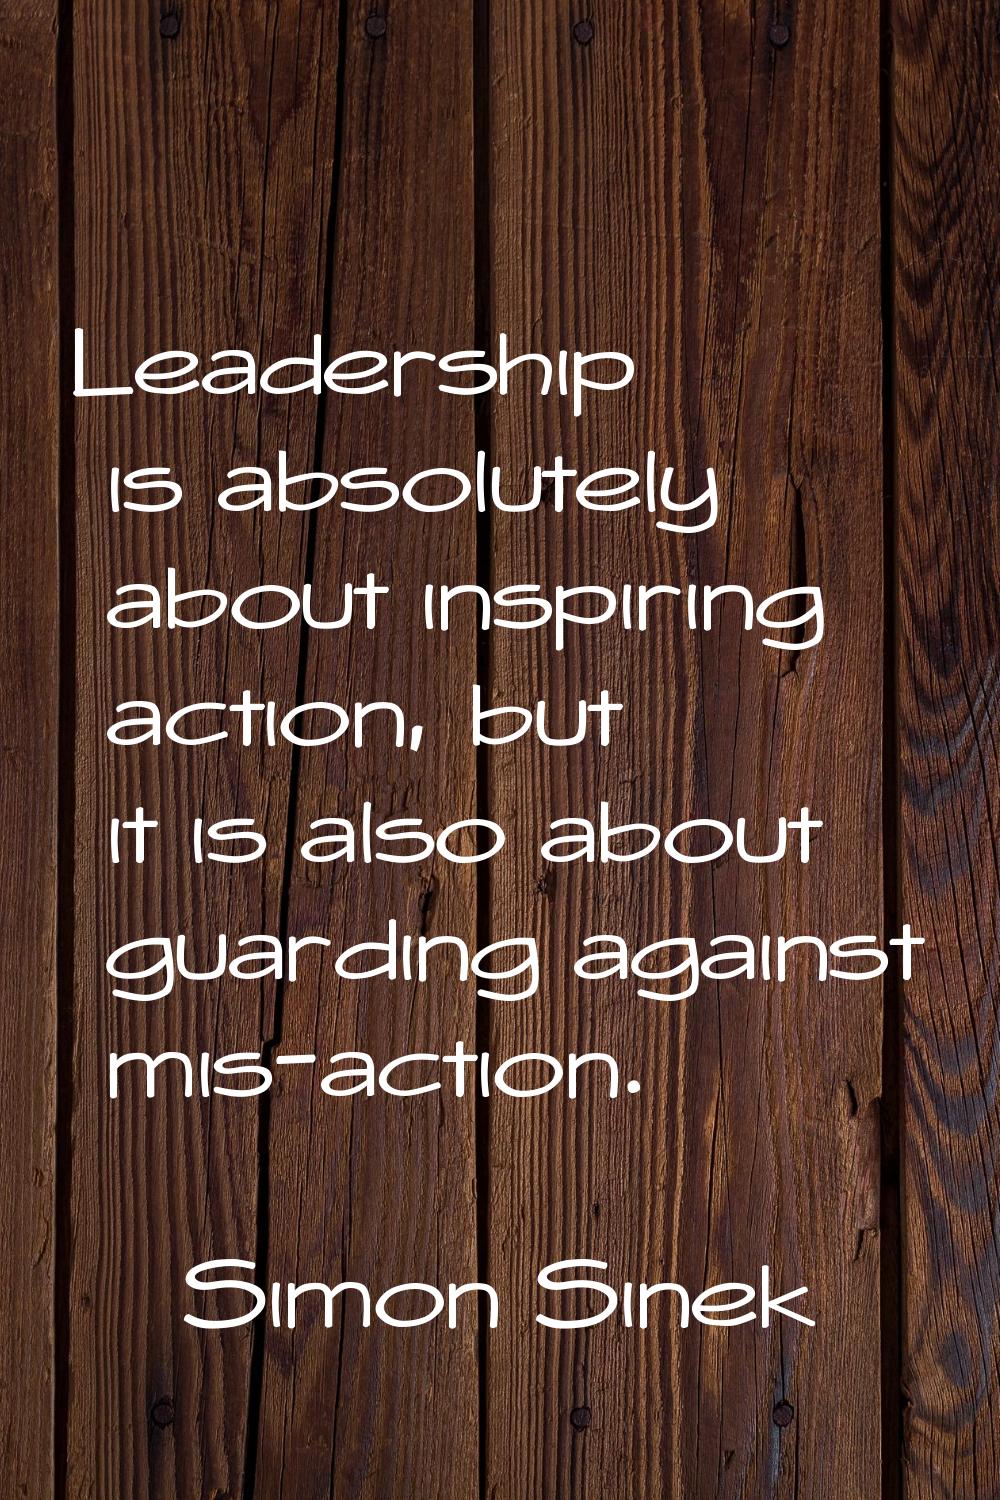 Leadership is absolutely about inspiring action, but it is also about guarding against mis-action.